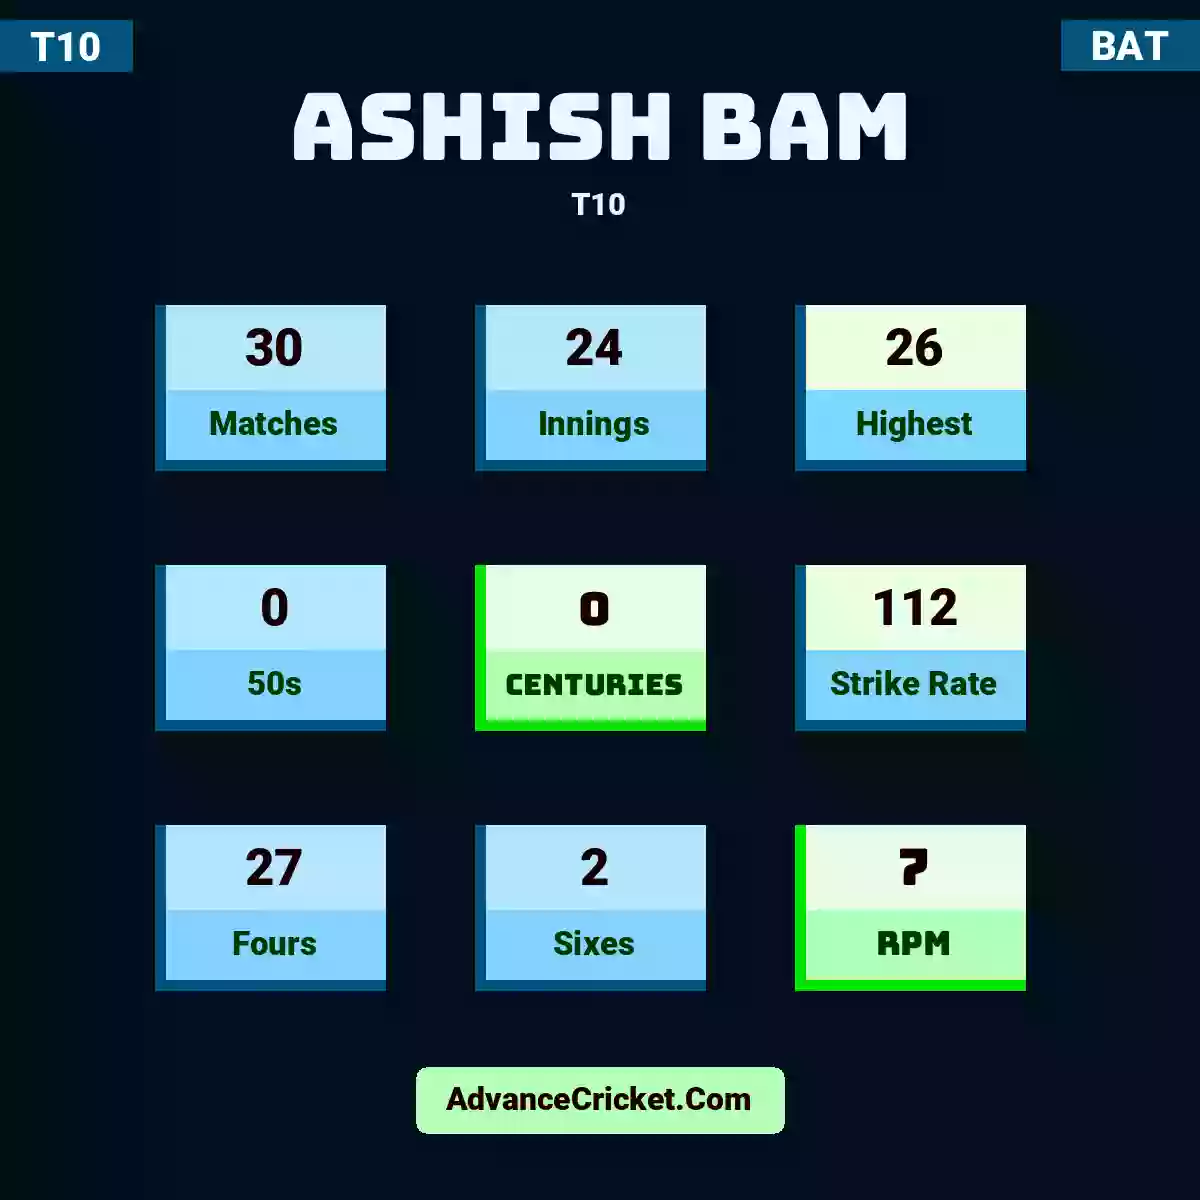 Ashish Bam T10 , Ashish Bam played 30 matches, scored 26 runs as highest, 0 half-centuries, and 0 centuries, with a strike rate of 112. A.Bam hit 27 fours and 2 sixes, with an RPM of 7.